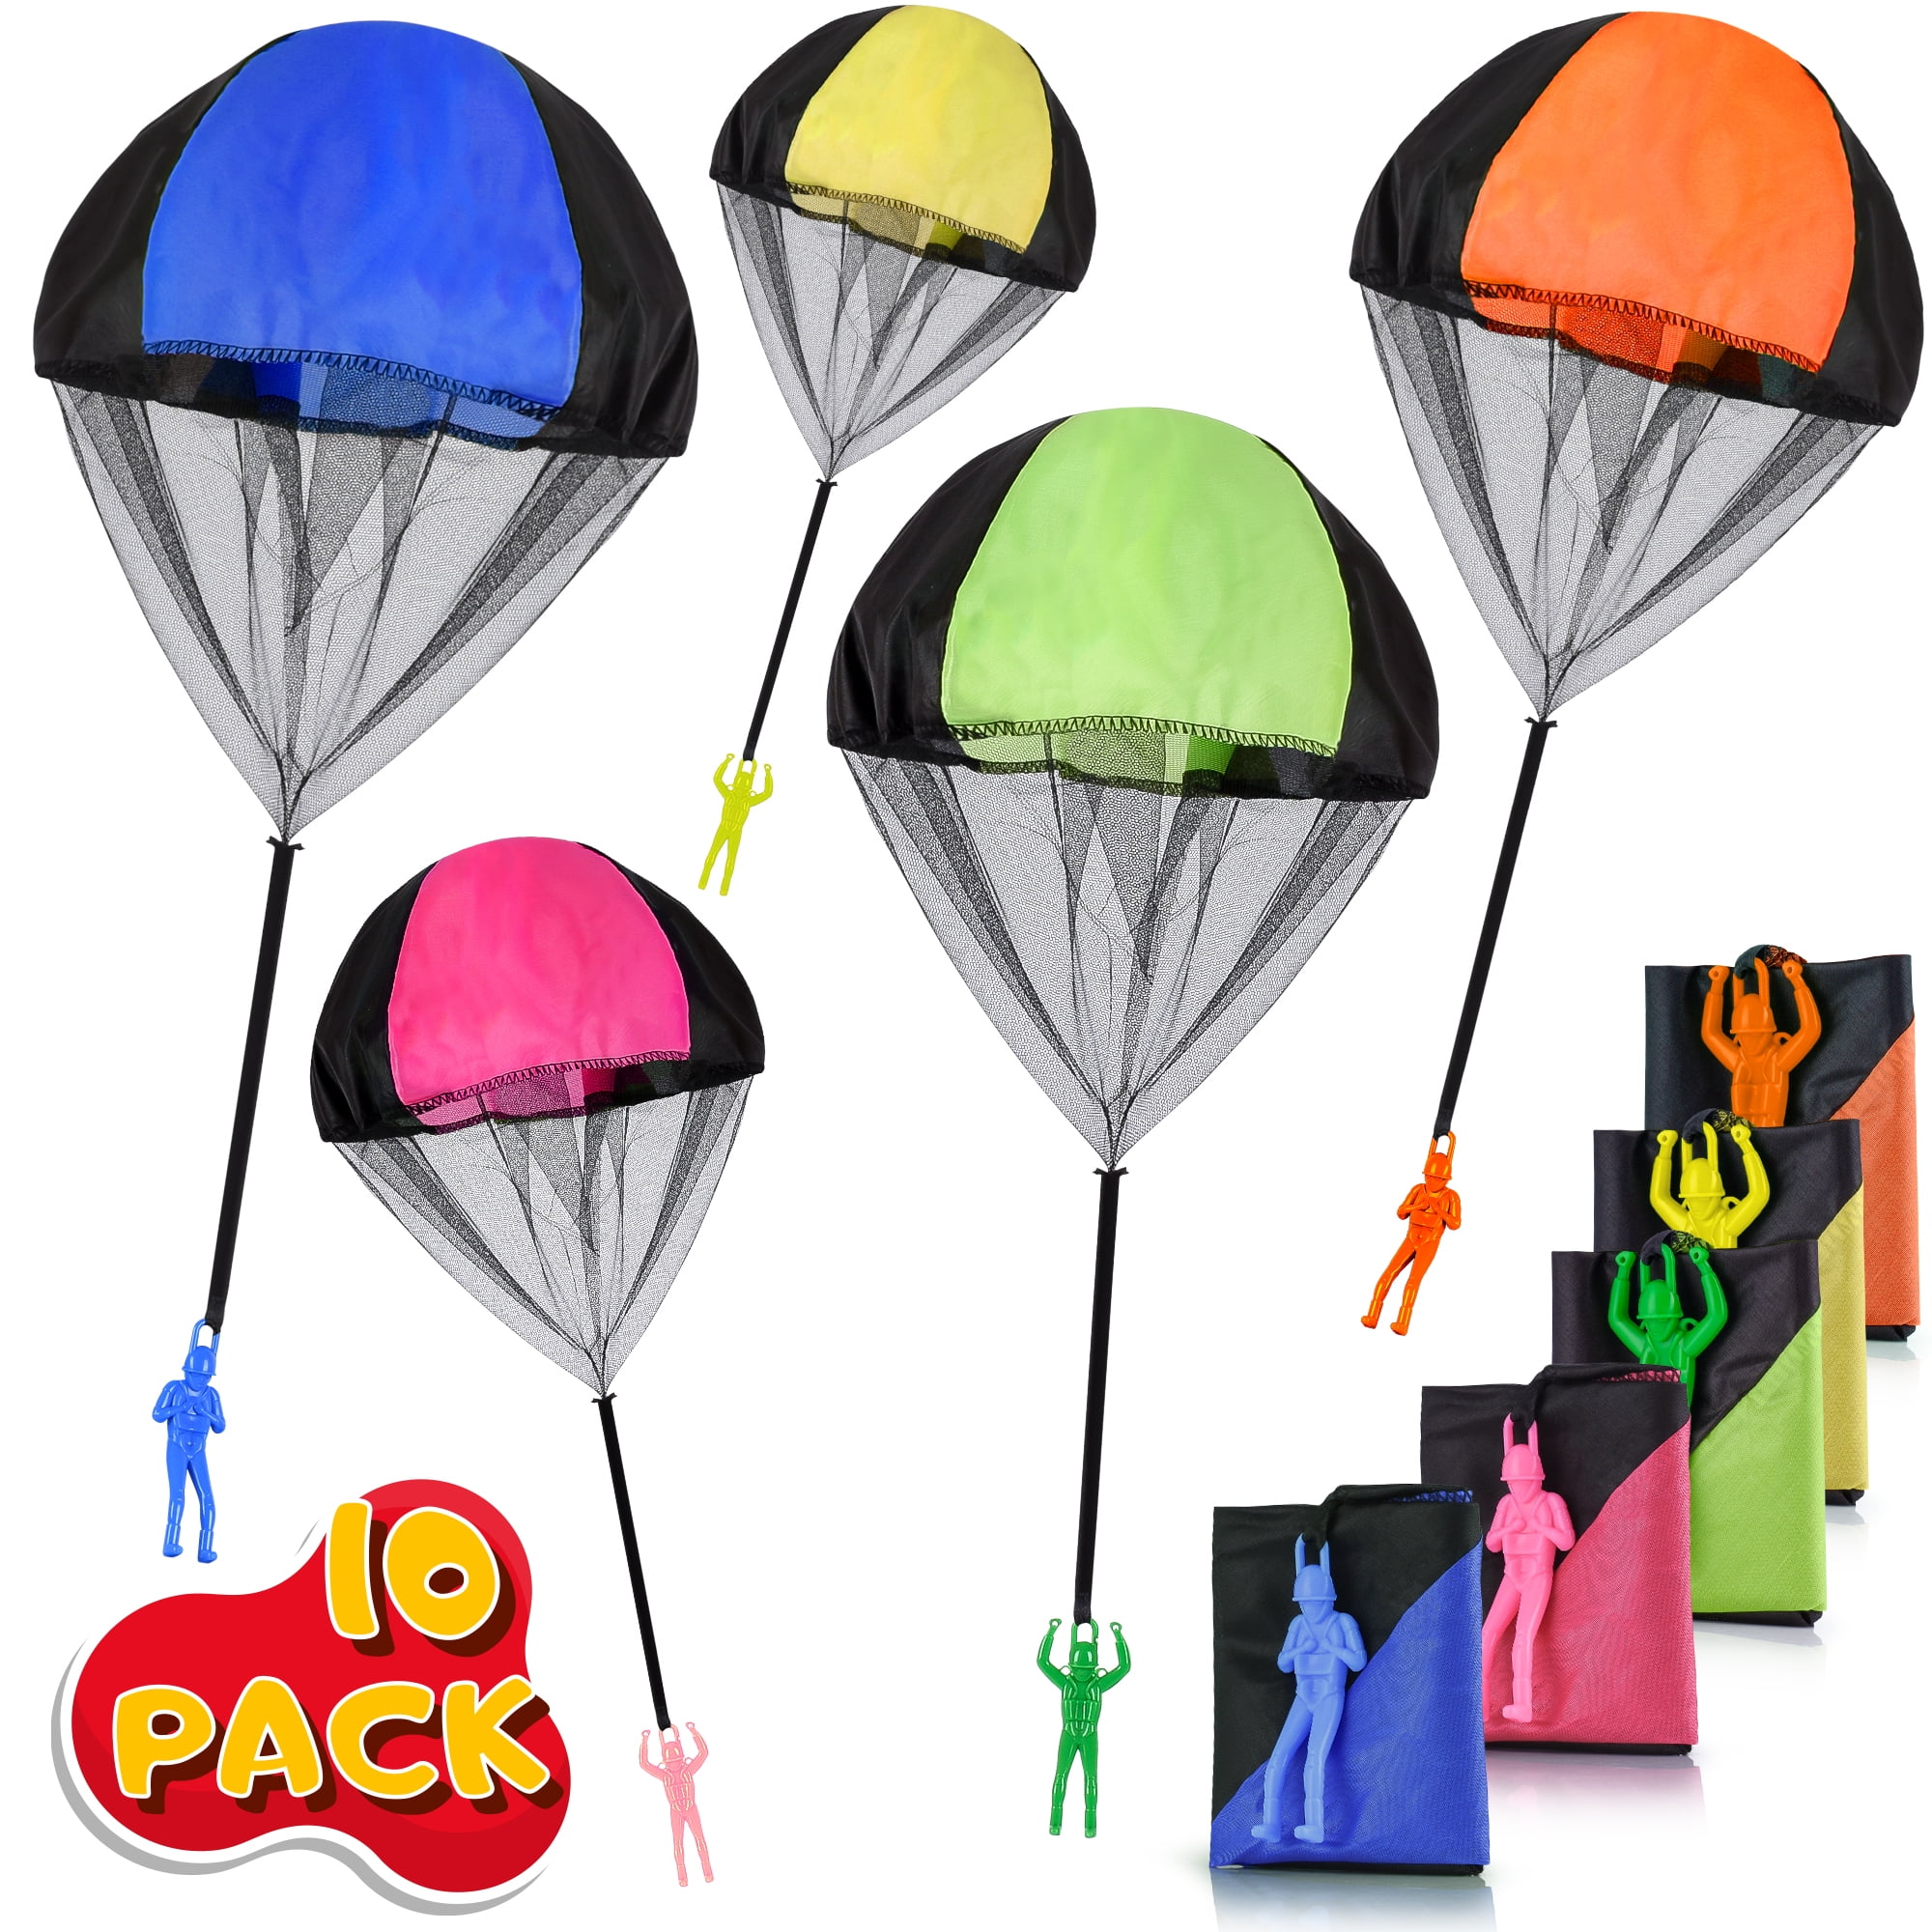 Details about   4X Plastic Ejecting Parachute Toy Outdoor Soldier Hand Throwing Parachute TN*ss 